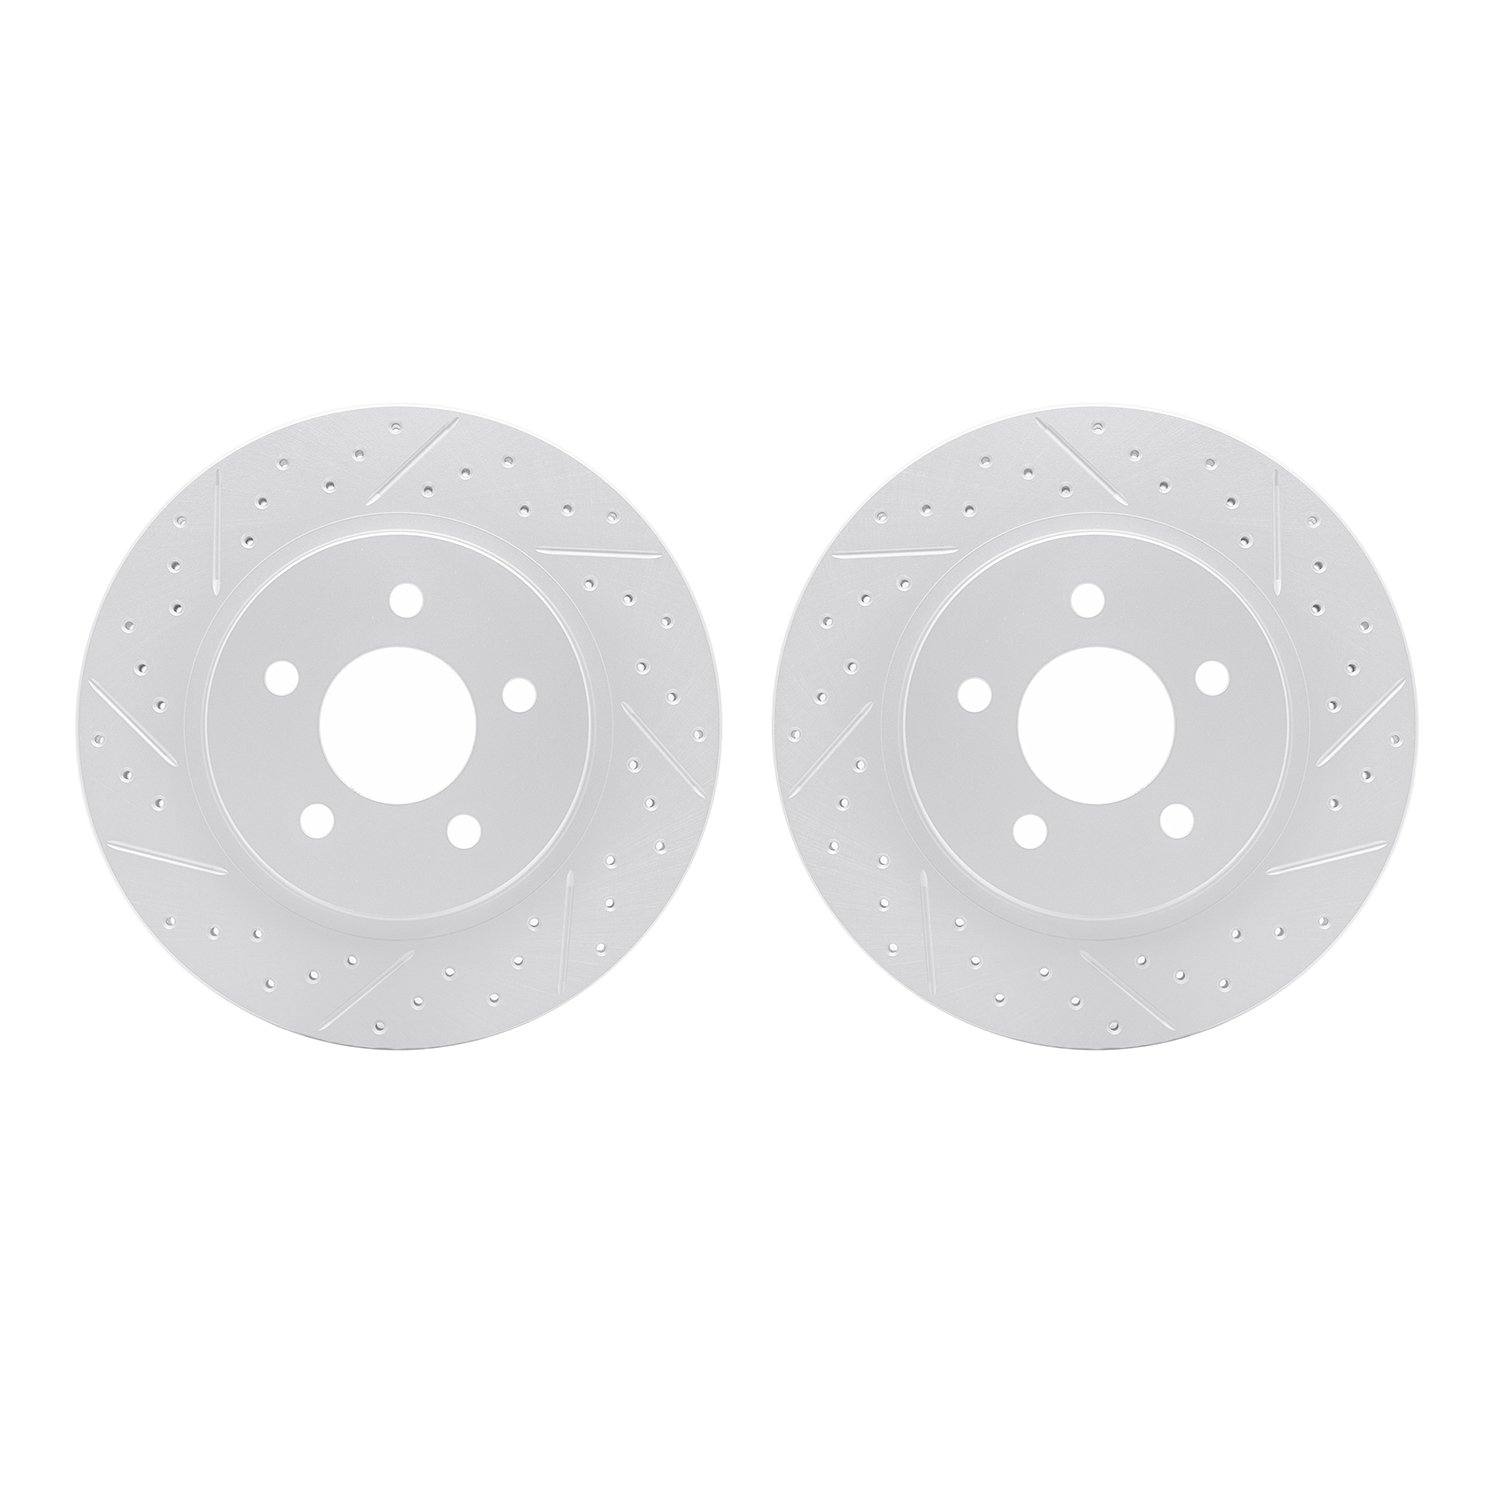 2002-54167 Geoperformance Drilled/Slotted Brake Rotors, 2005-2014 Ford/Lincoln/Mercury/Mazda, Position: Rear